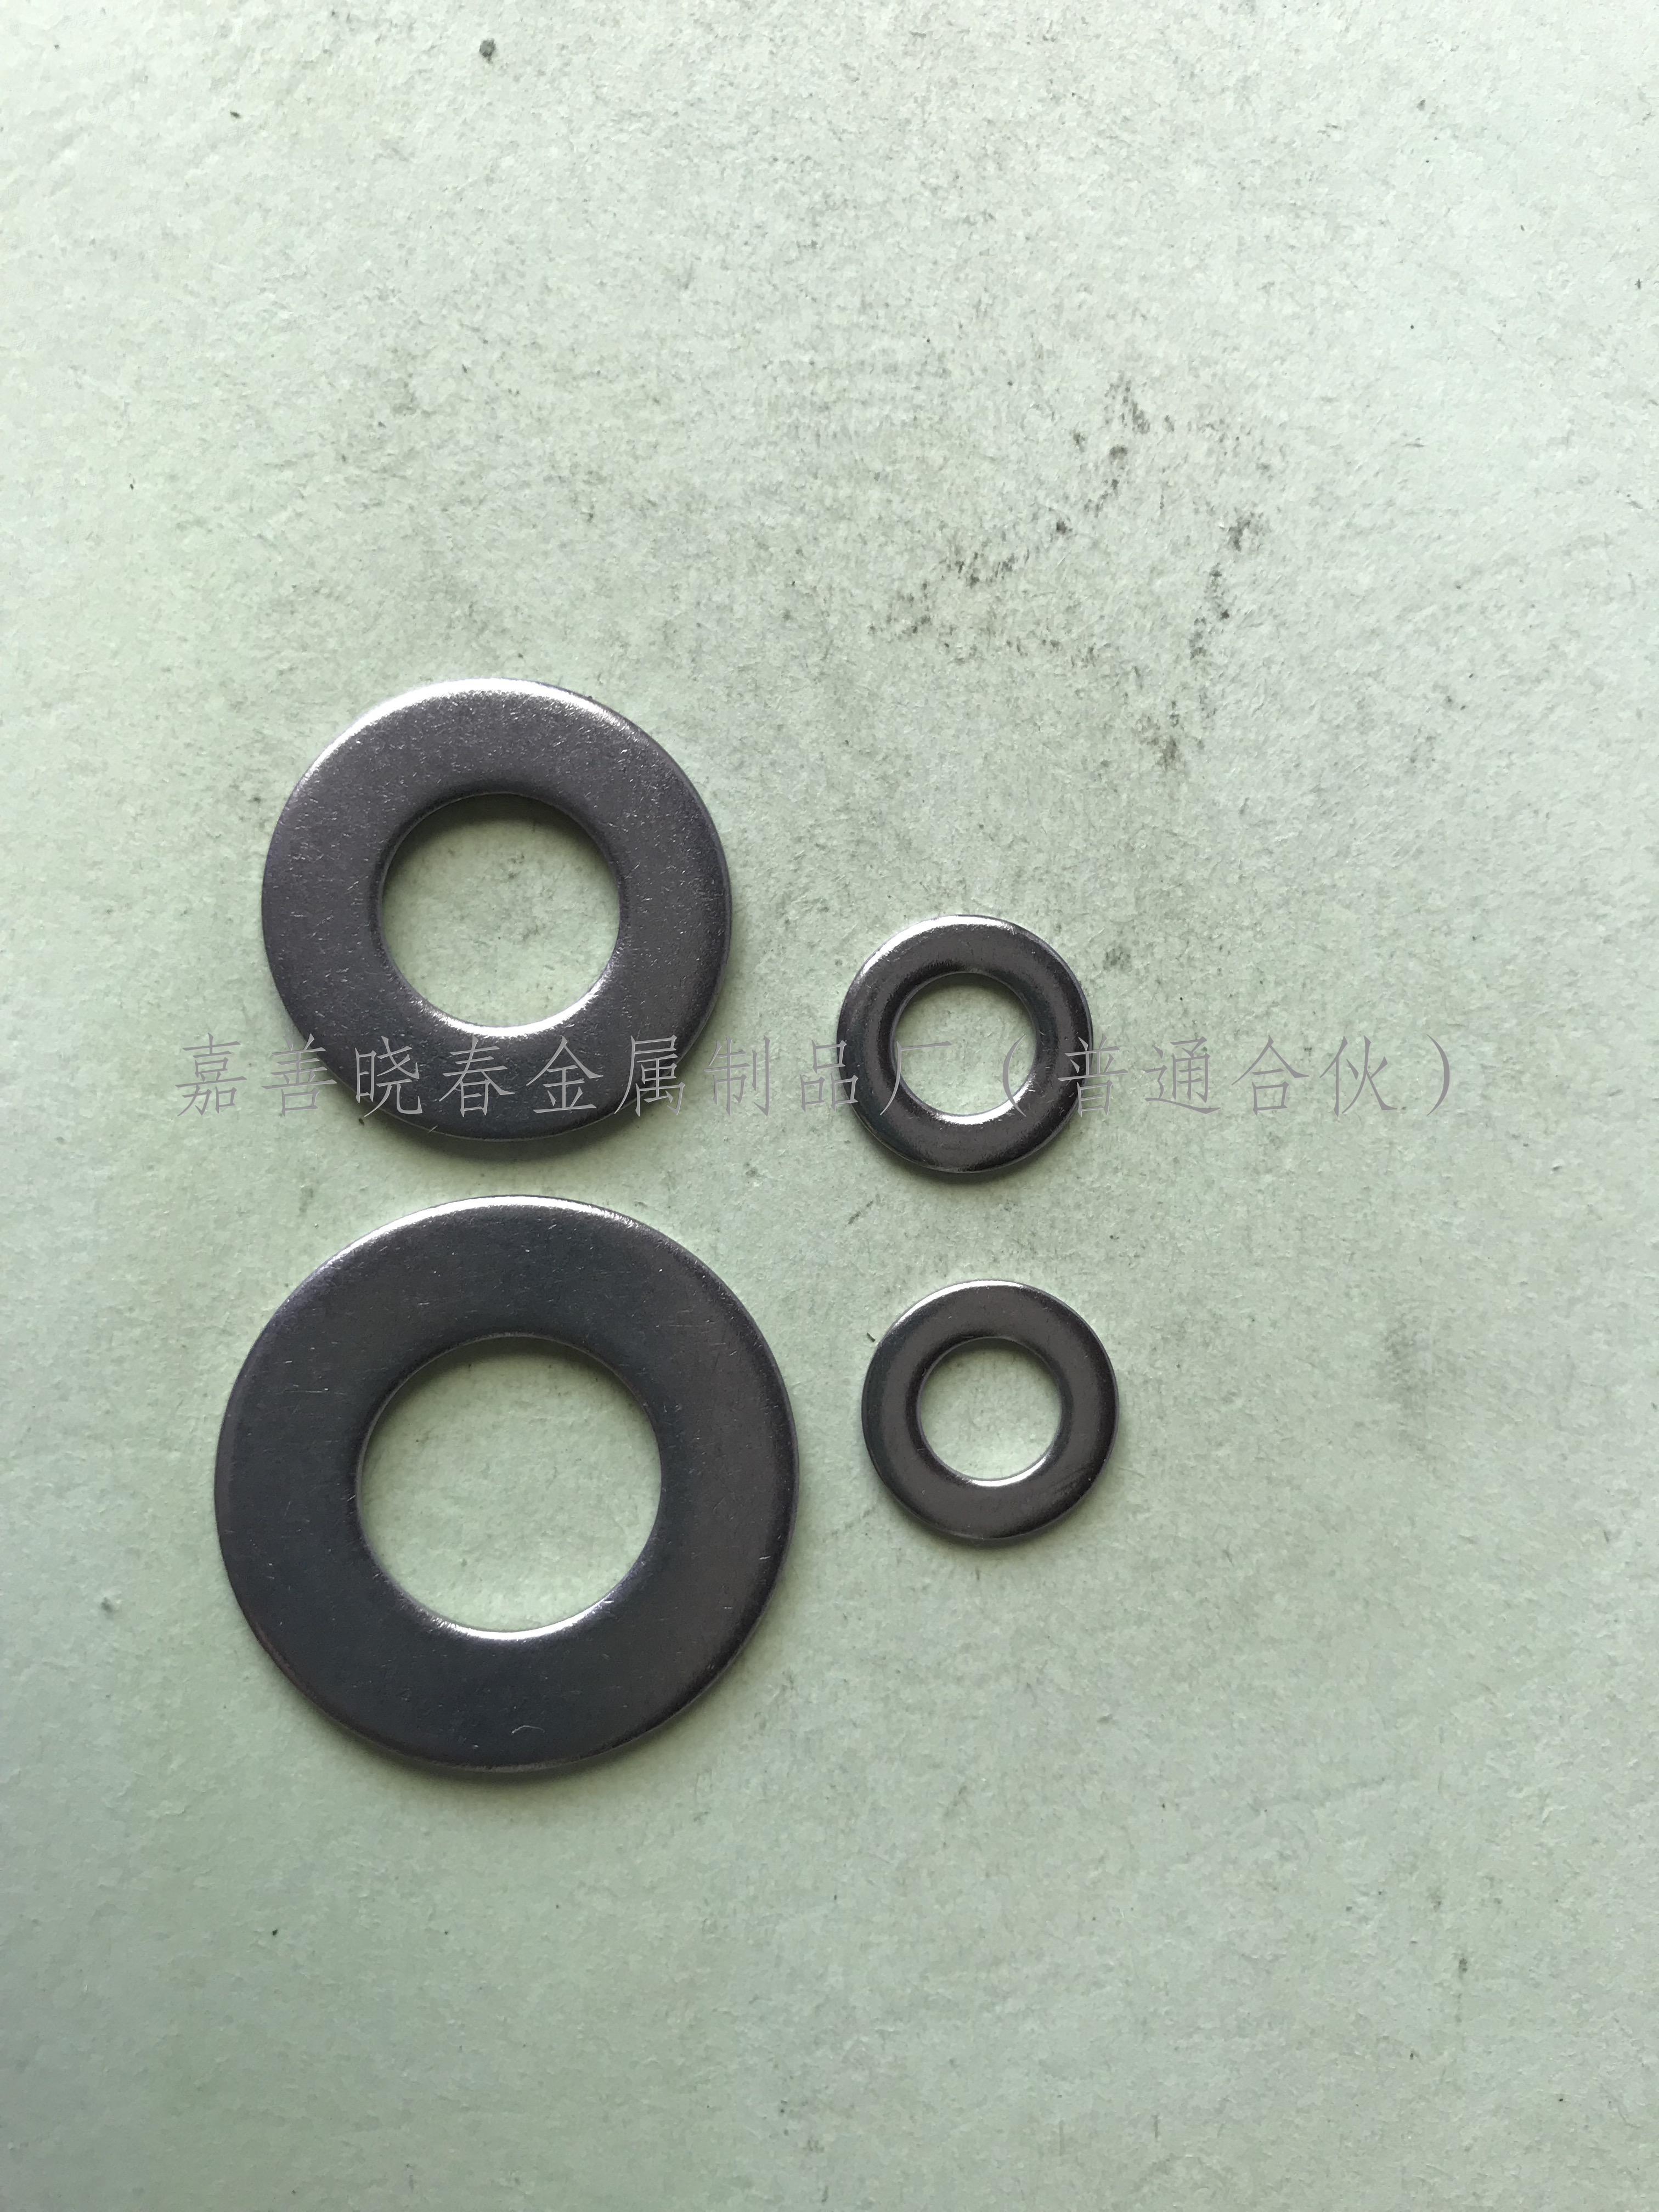 DIN 6340 Washer For Clamping Devices